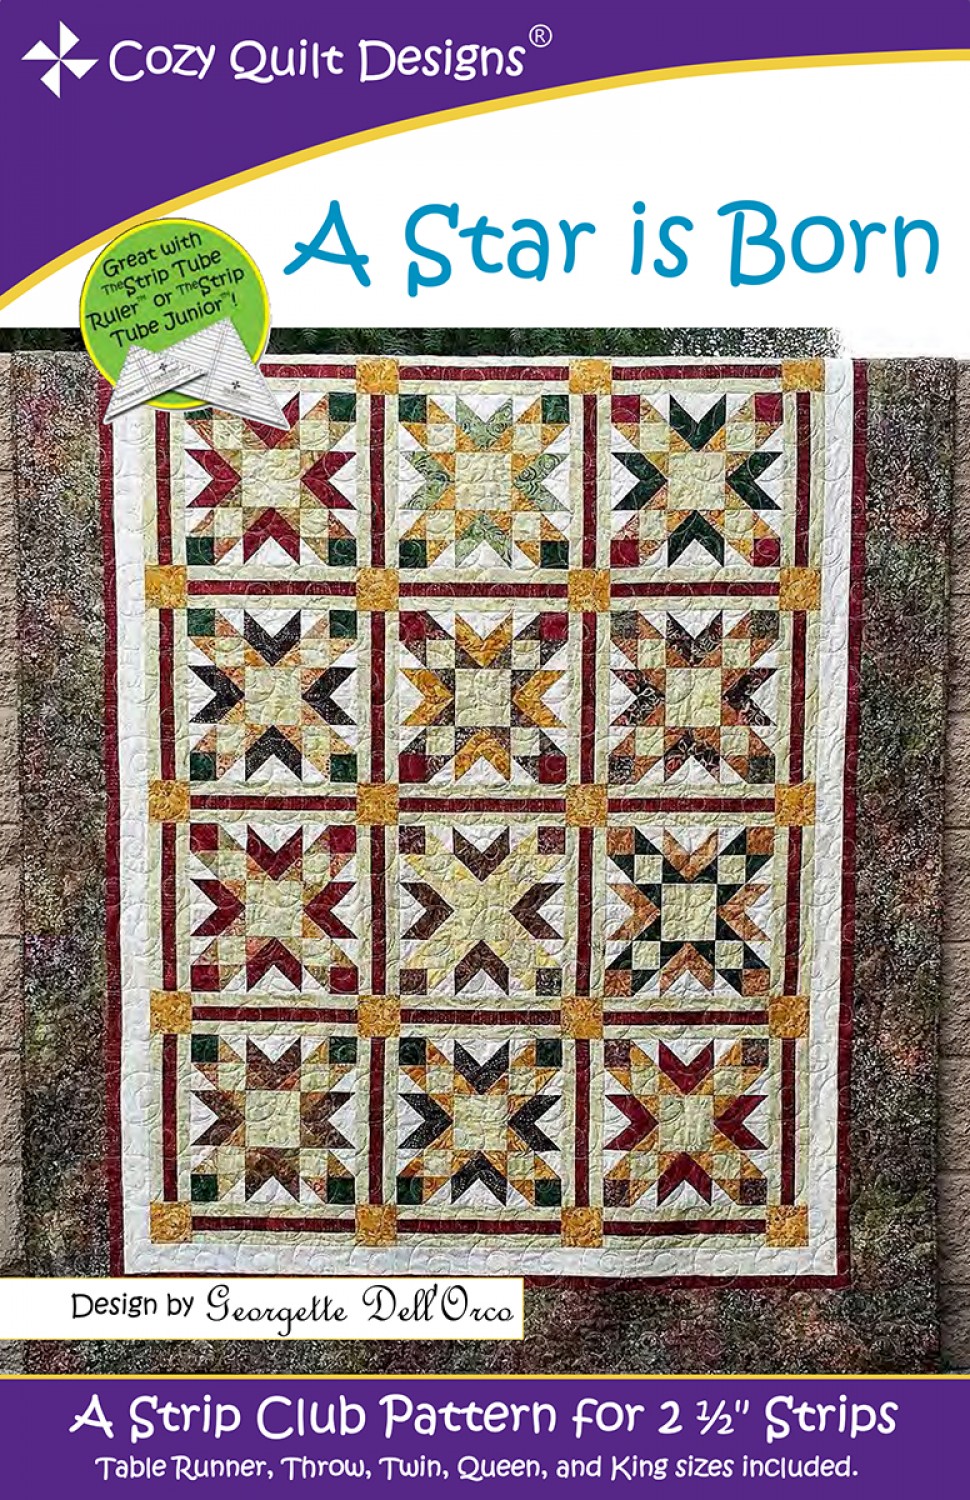 Cozy Quilt Designs A Star is Born Quilt Pattern